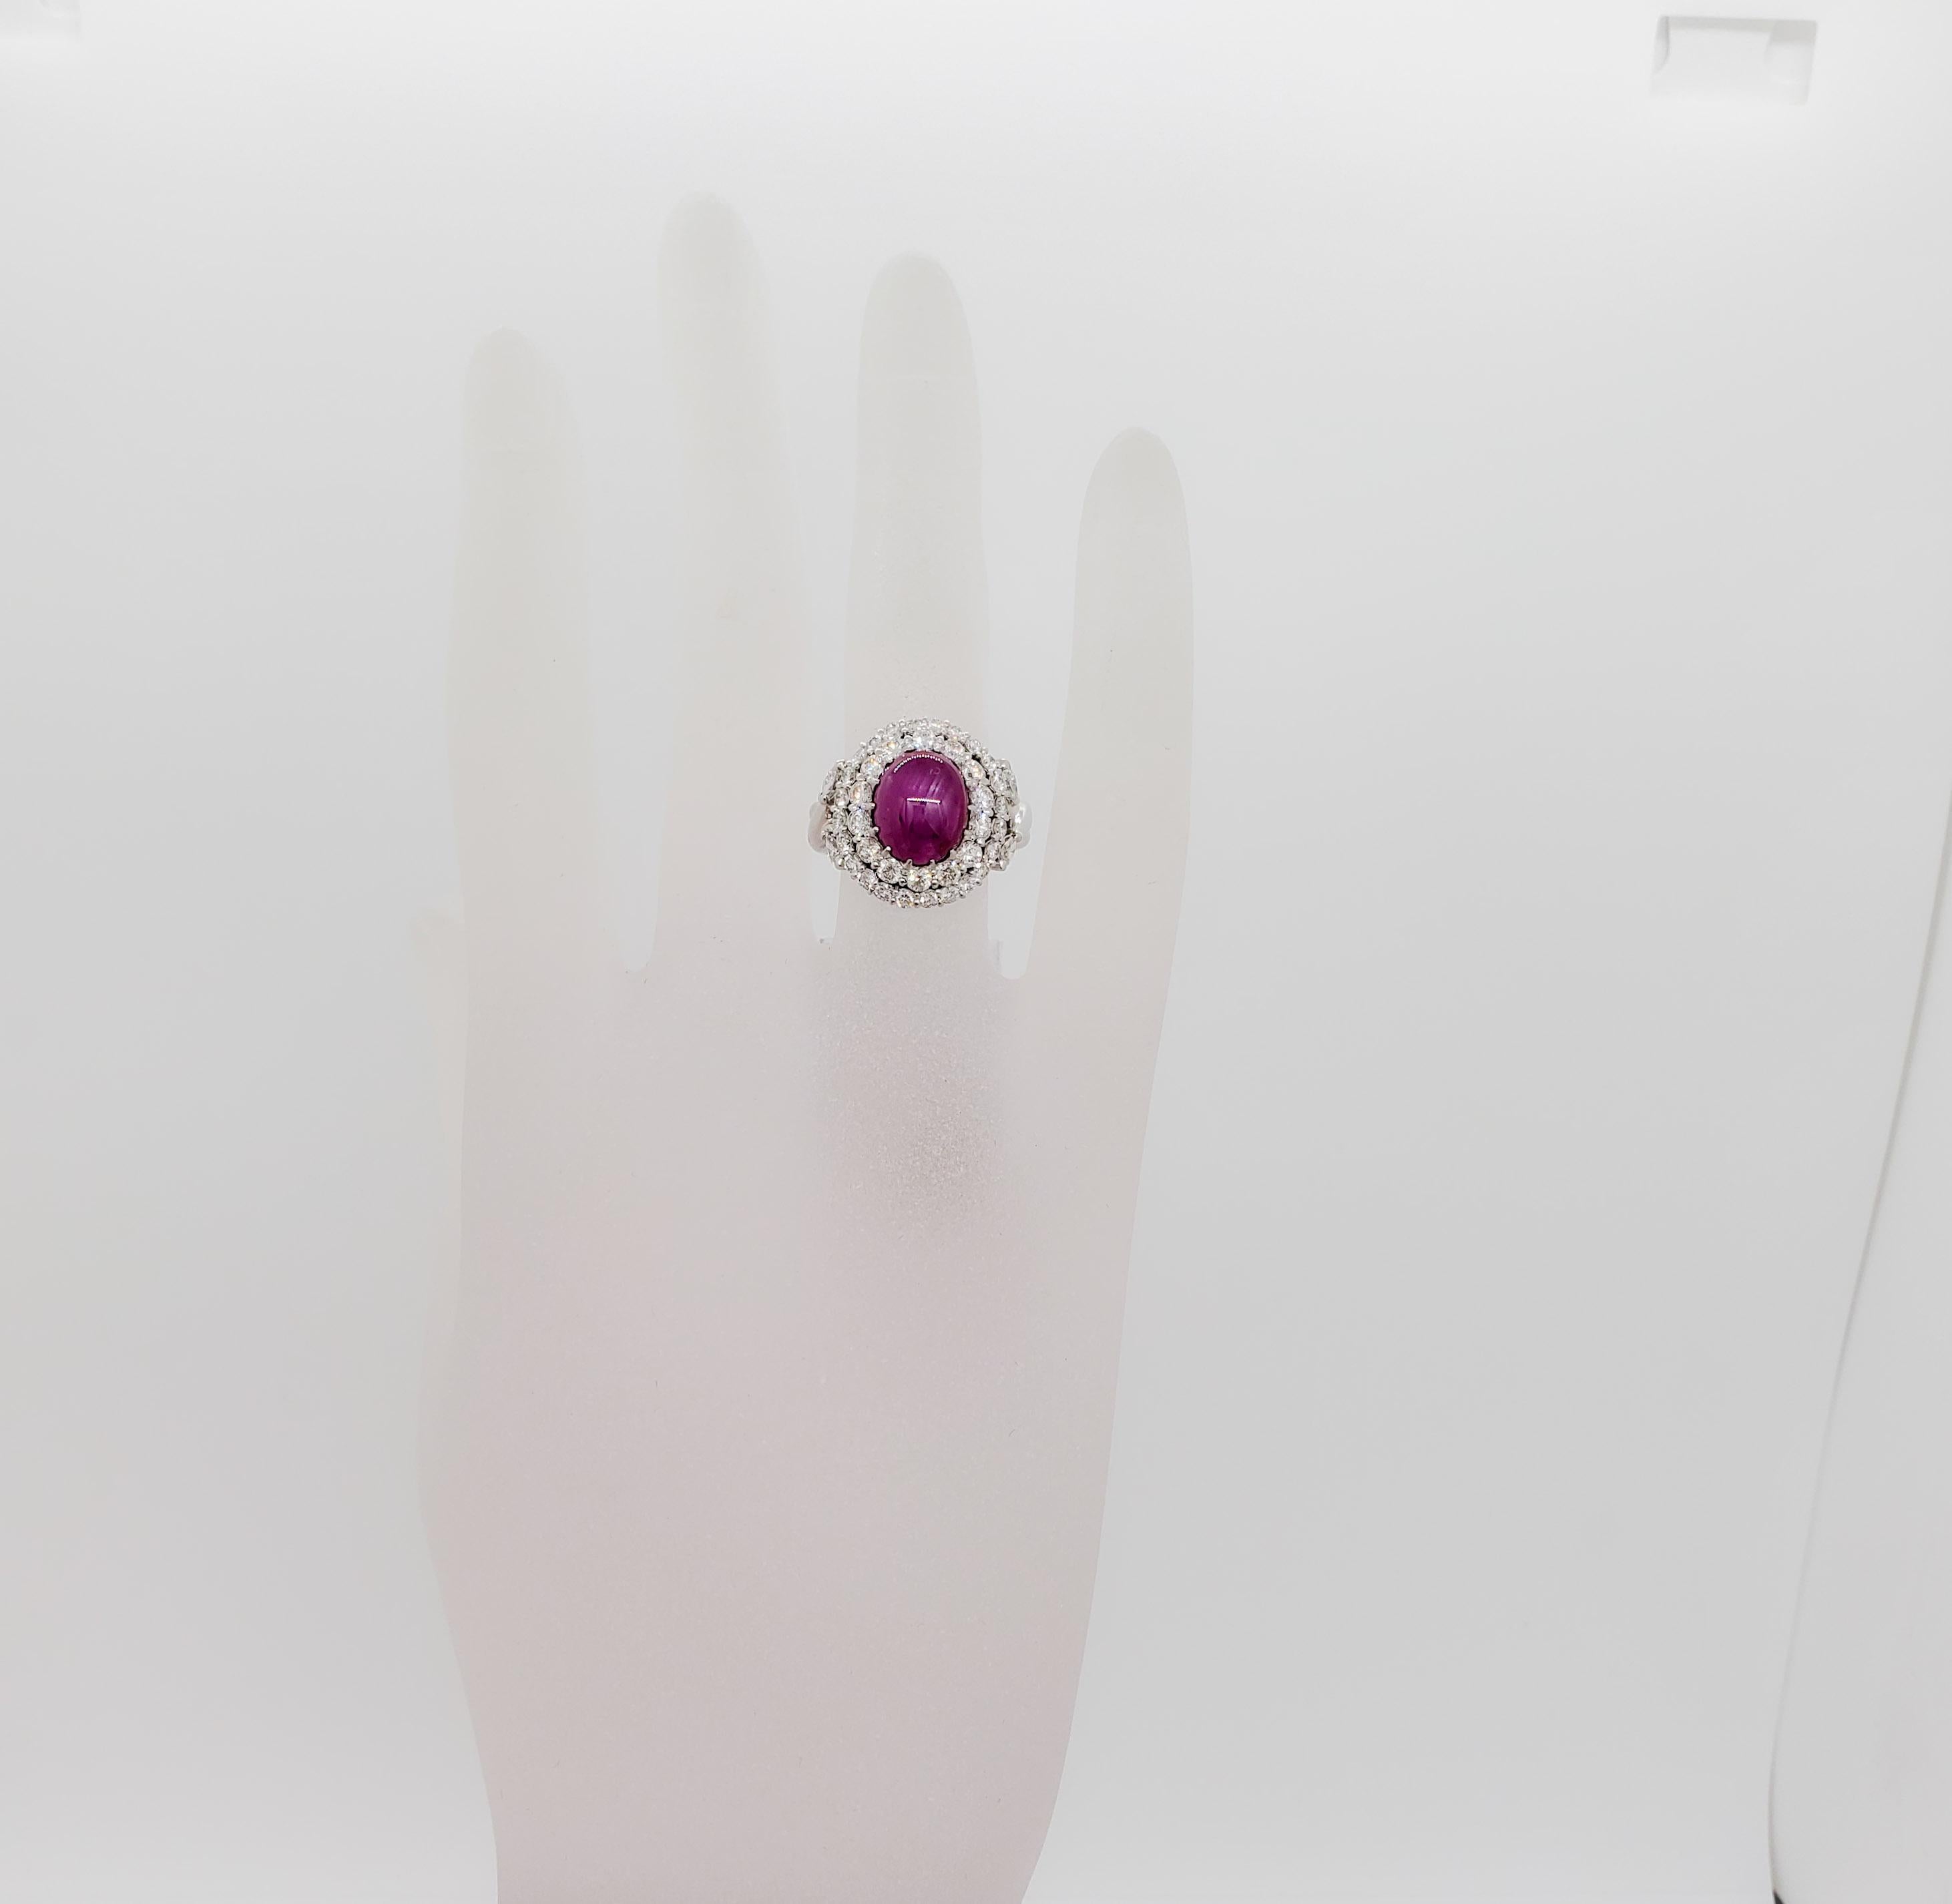 Gorgeous deep red 5.87 ct. star ruby cabochon oval with 1.57 ct. good quality white diamond rounds and marquise shapes.  Handmade platinum mounting in size 6.25.  